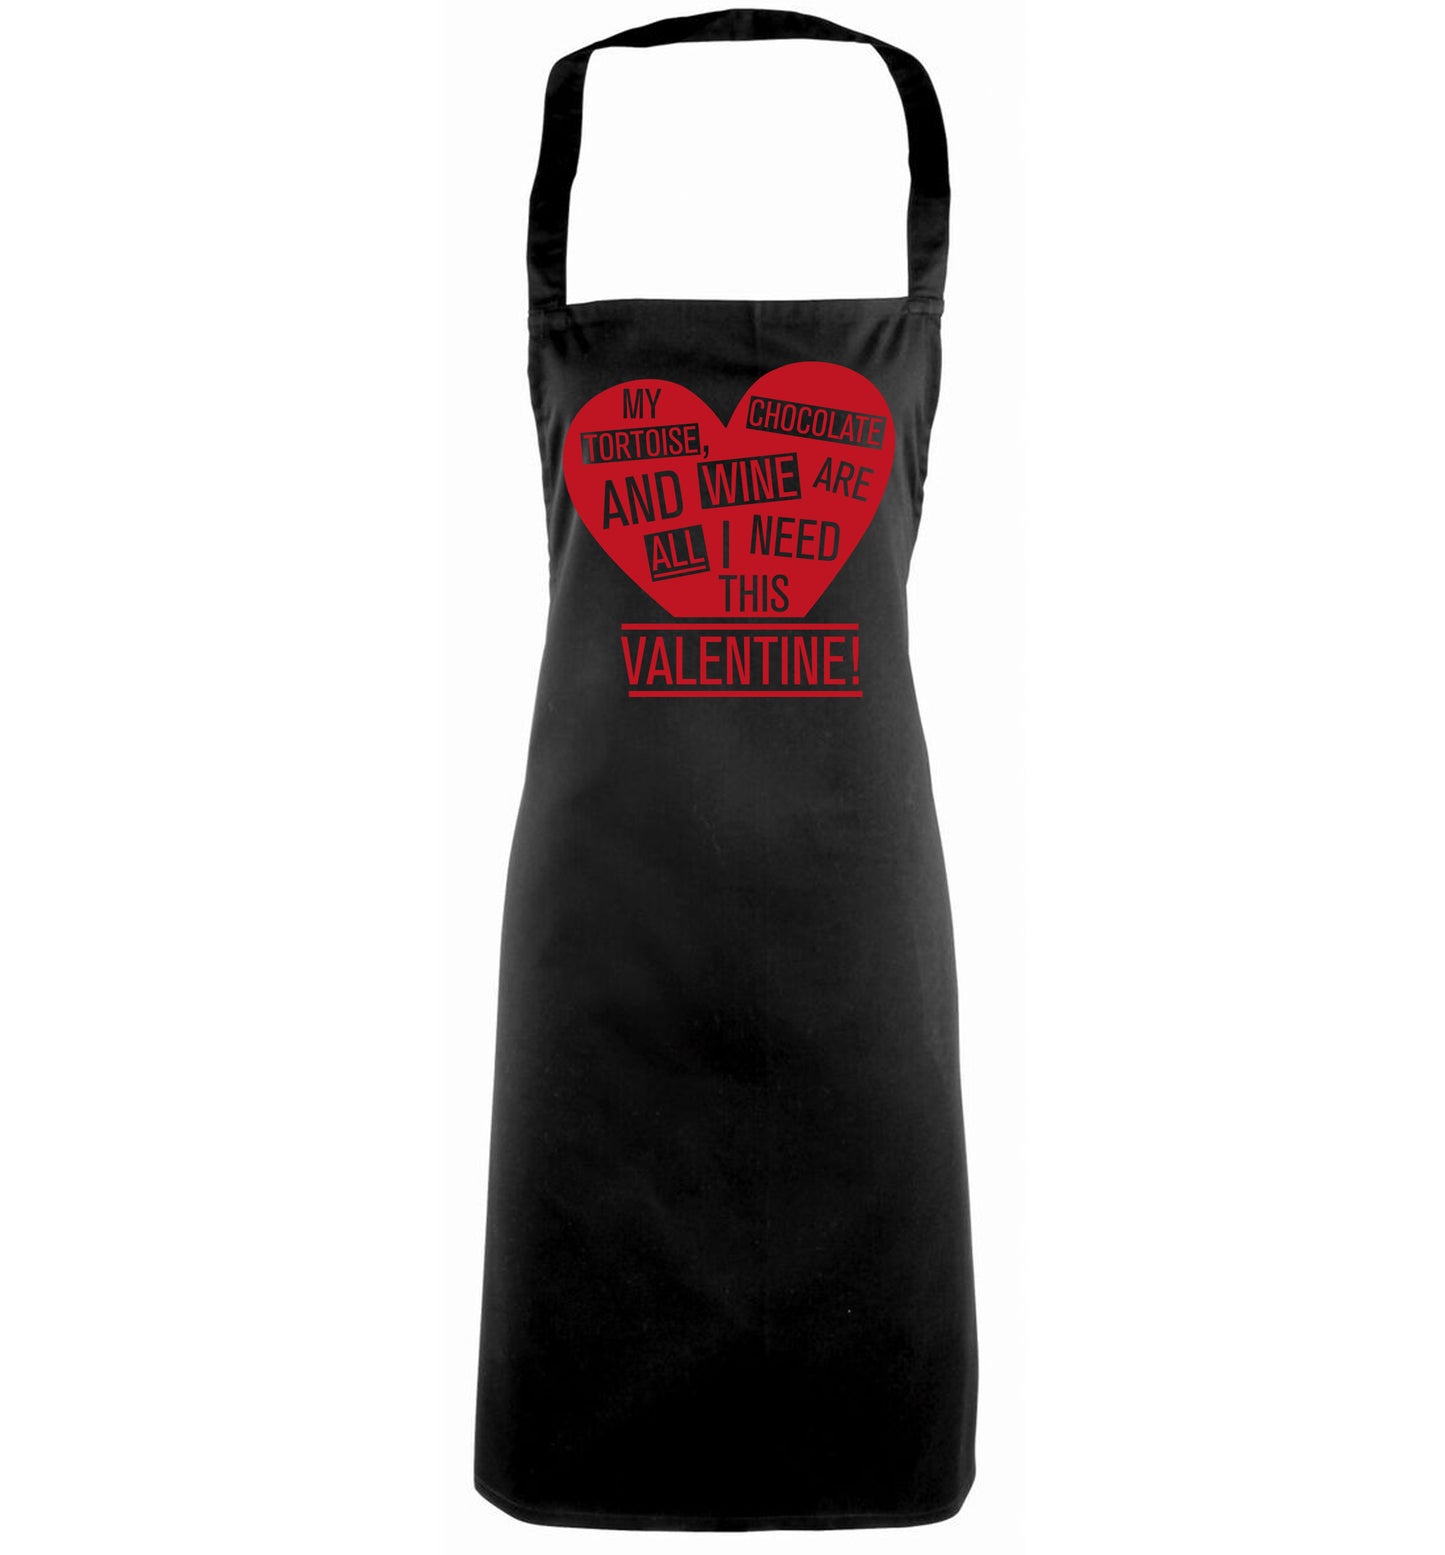 My tortoise, chocolate and wine are all I need this valentine! black apron